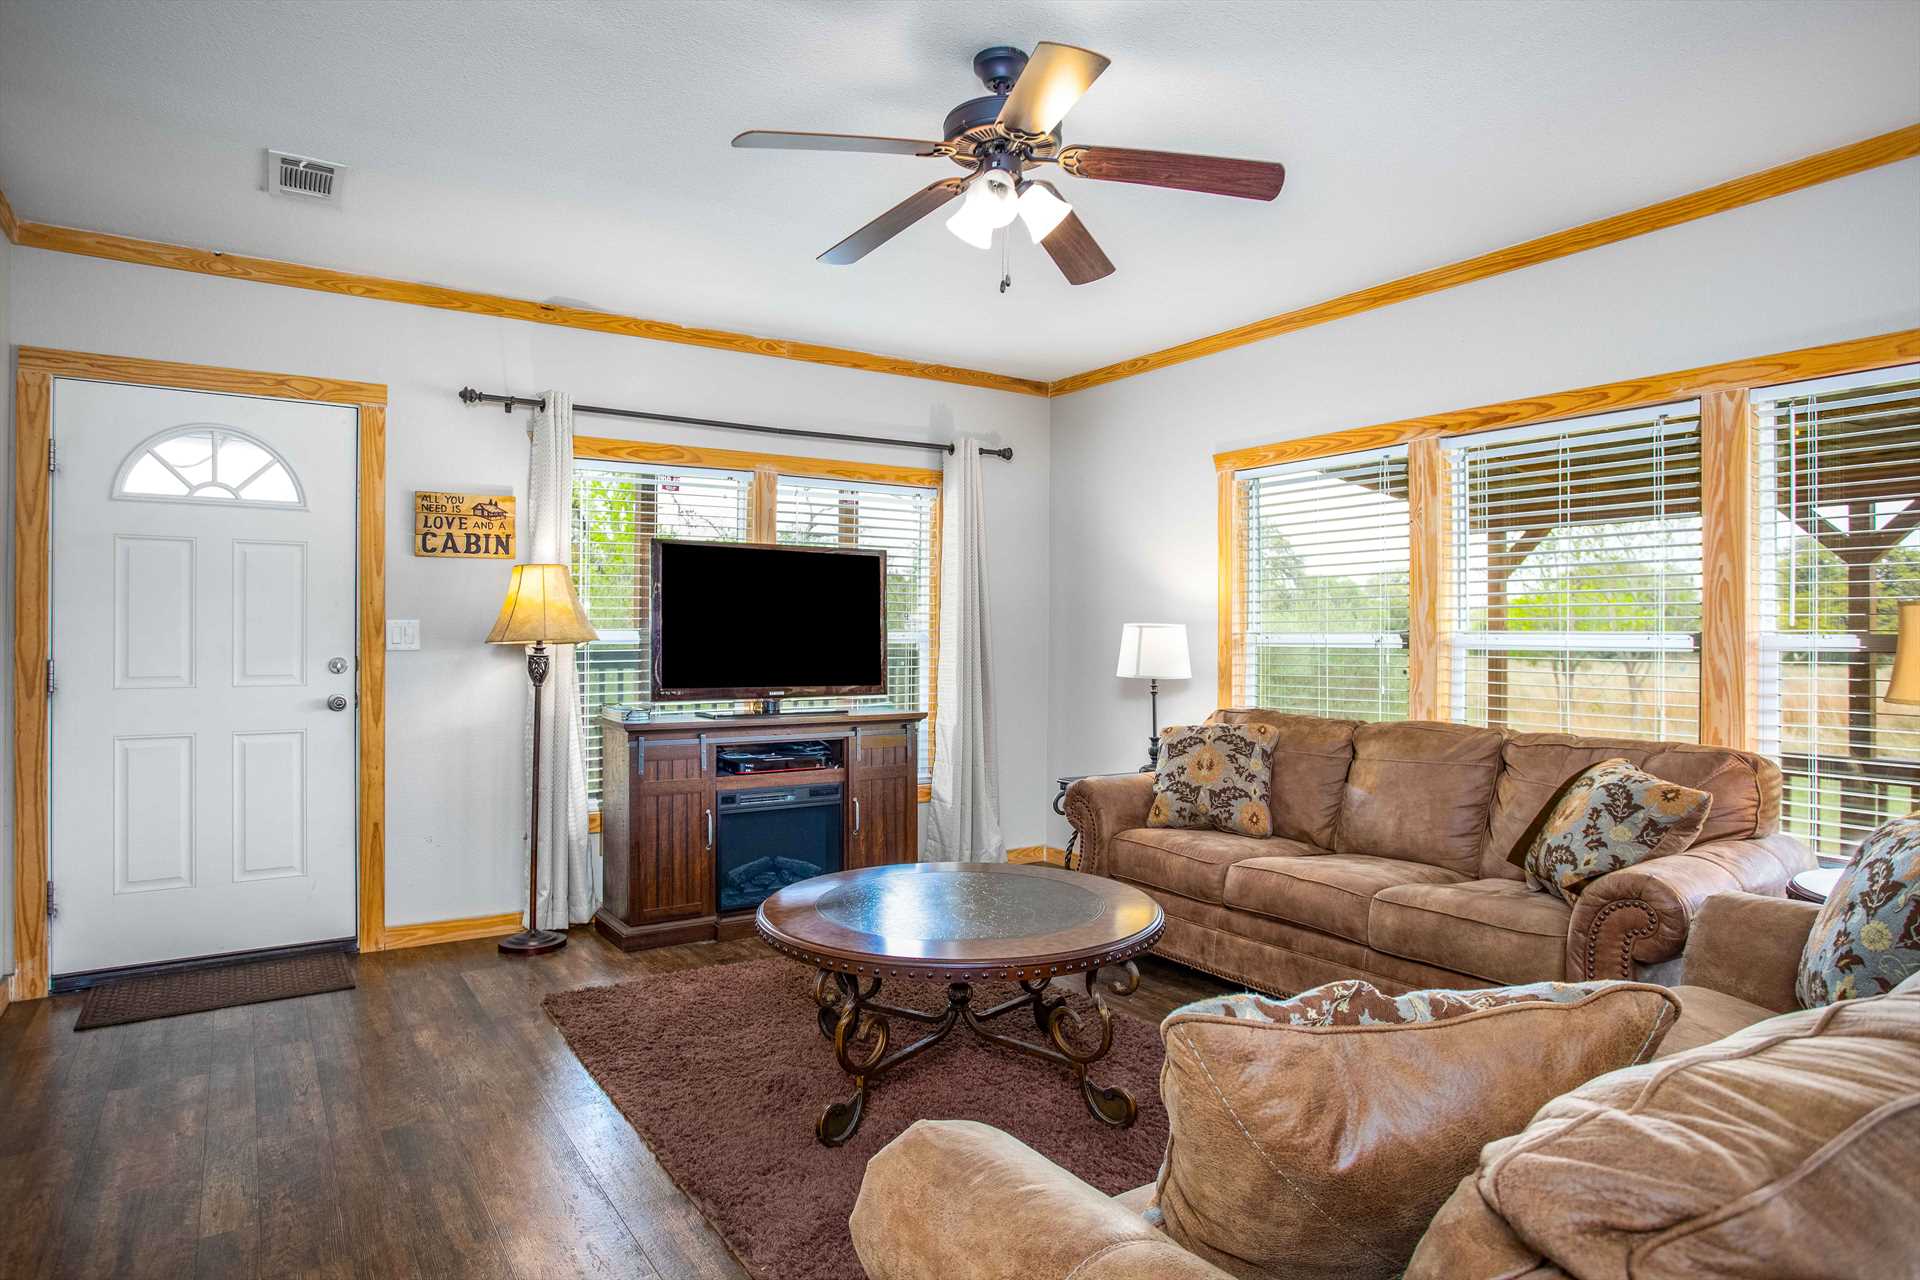                                                 Satellite TVs, Wifi Internet, central air, and ceiling fans all help to make your visit to the Hideaway both comfortable and entertaining!